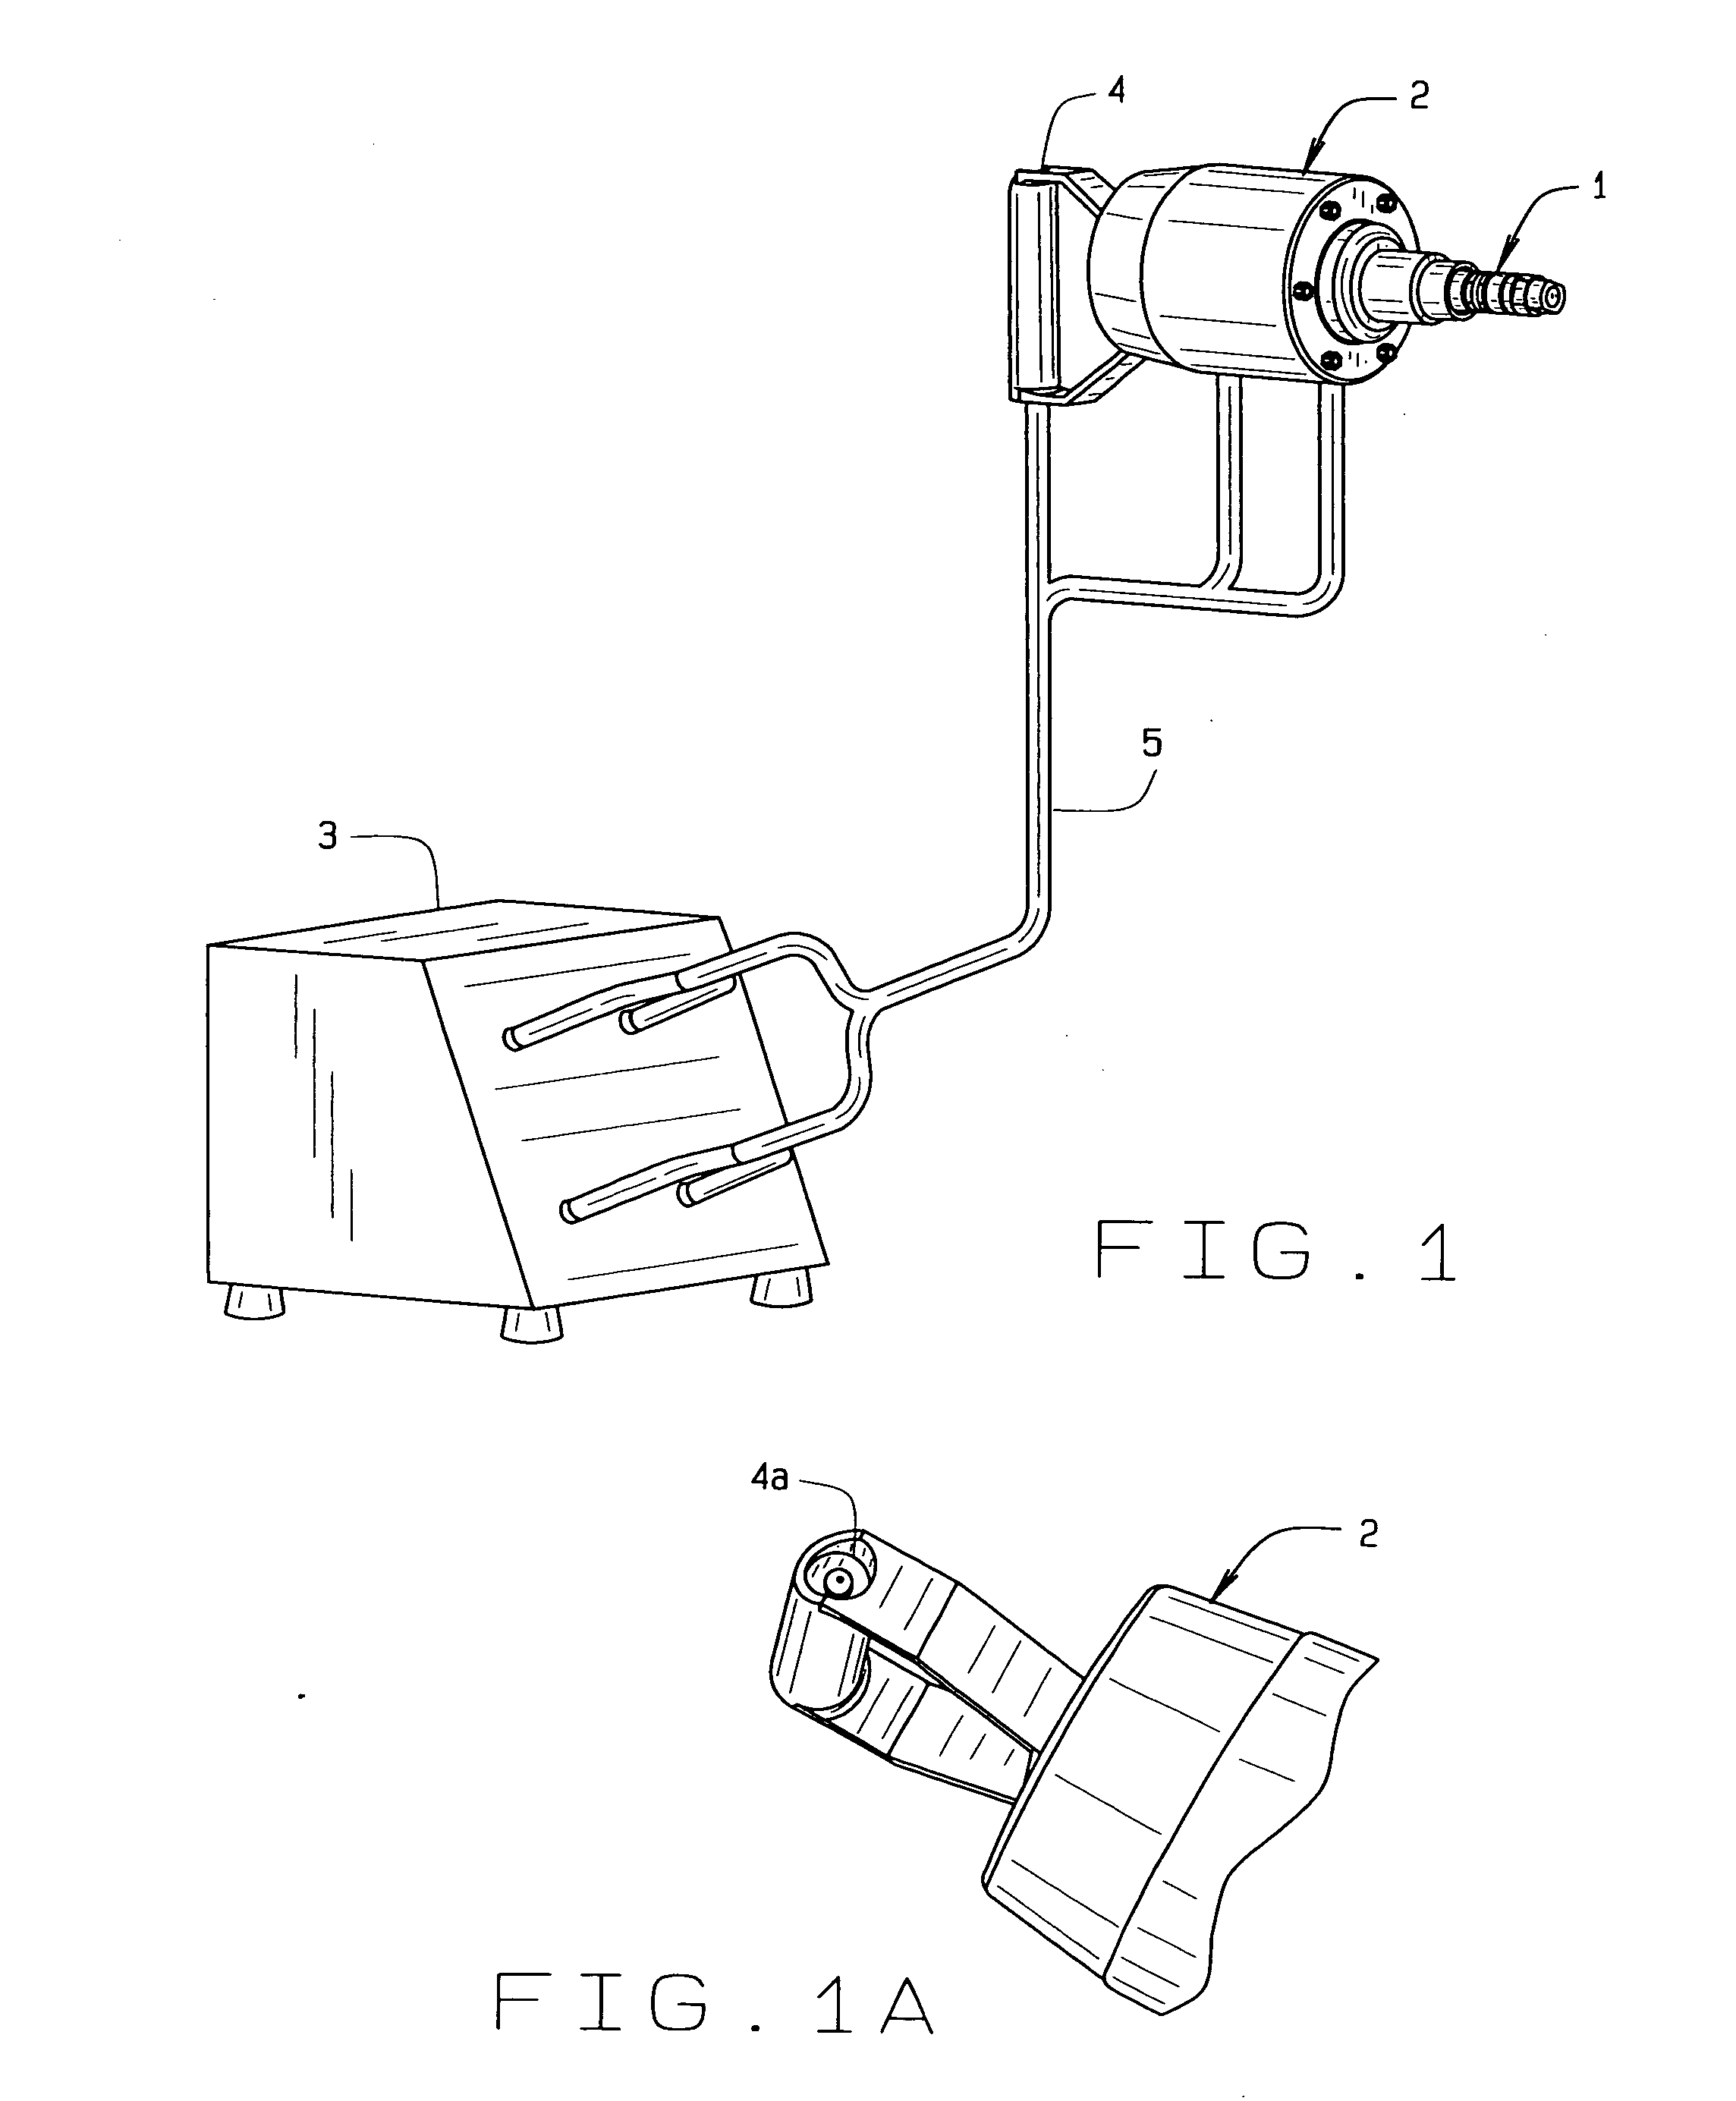 System and method for radially expanding hollow cylindrical objects